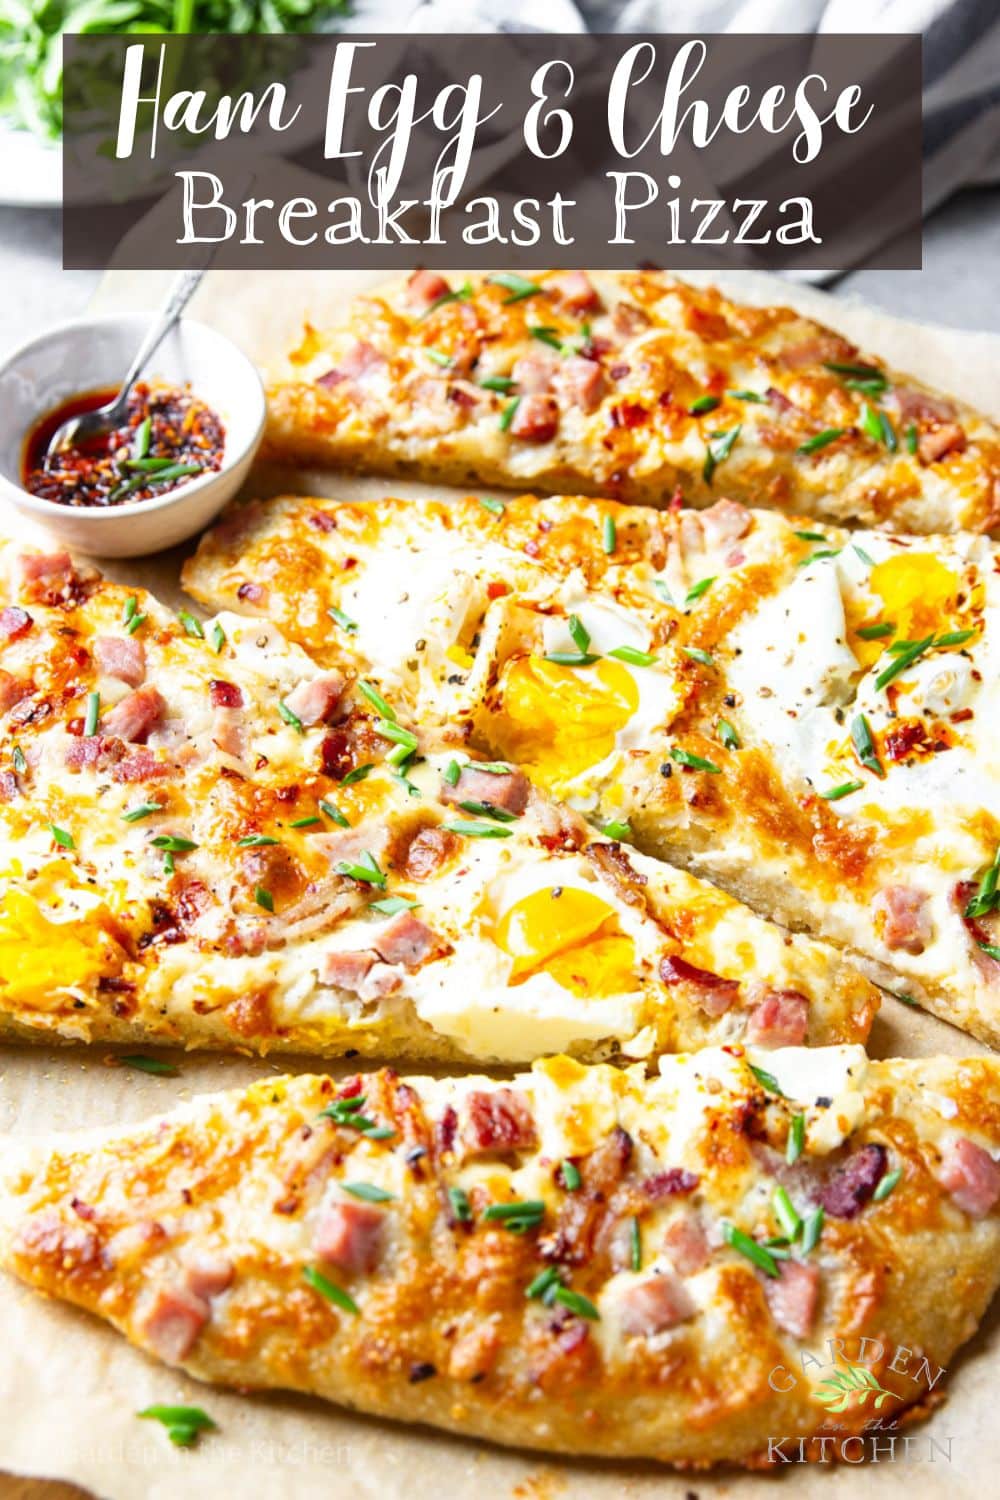 Sliced of breakfast pizza with eggs, bacon, ham and cheese. A pinch bowl with chili oil for garnishing. 